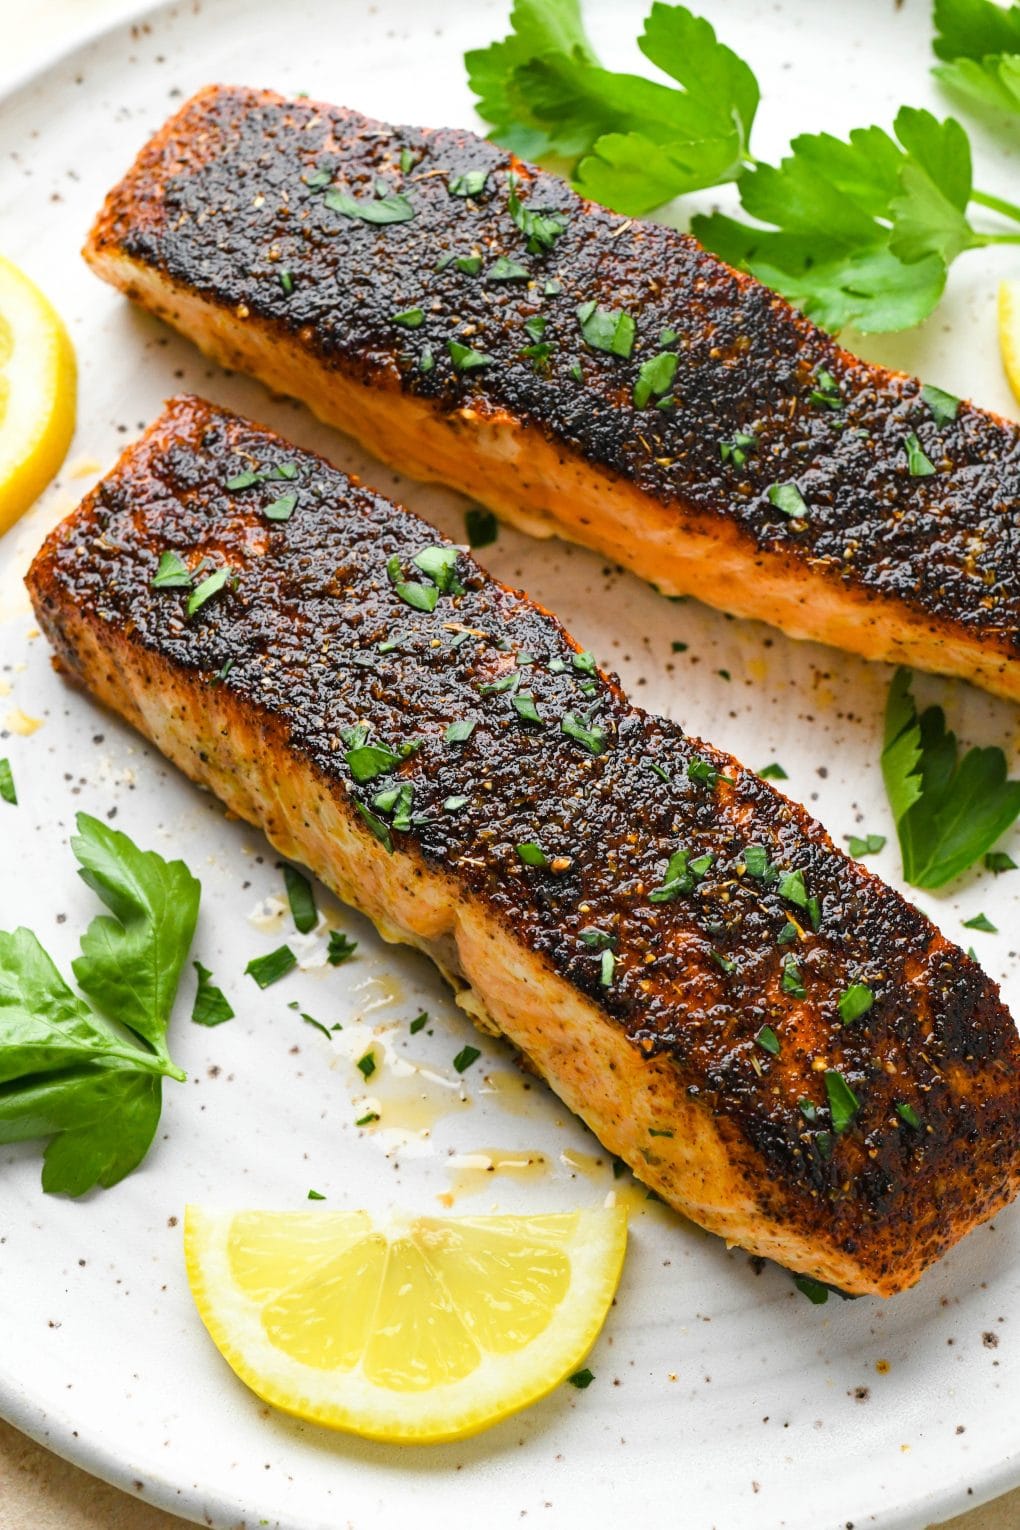 Two blackened salmon filets on a white speckled plate, surrounded by fresh herbs and lemon wedges.